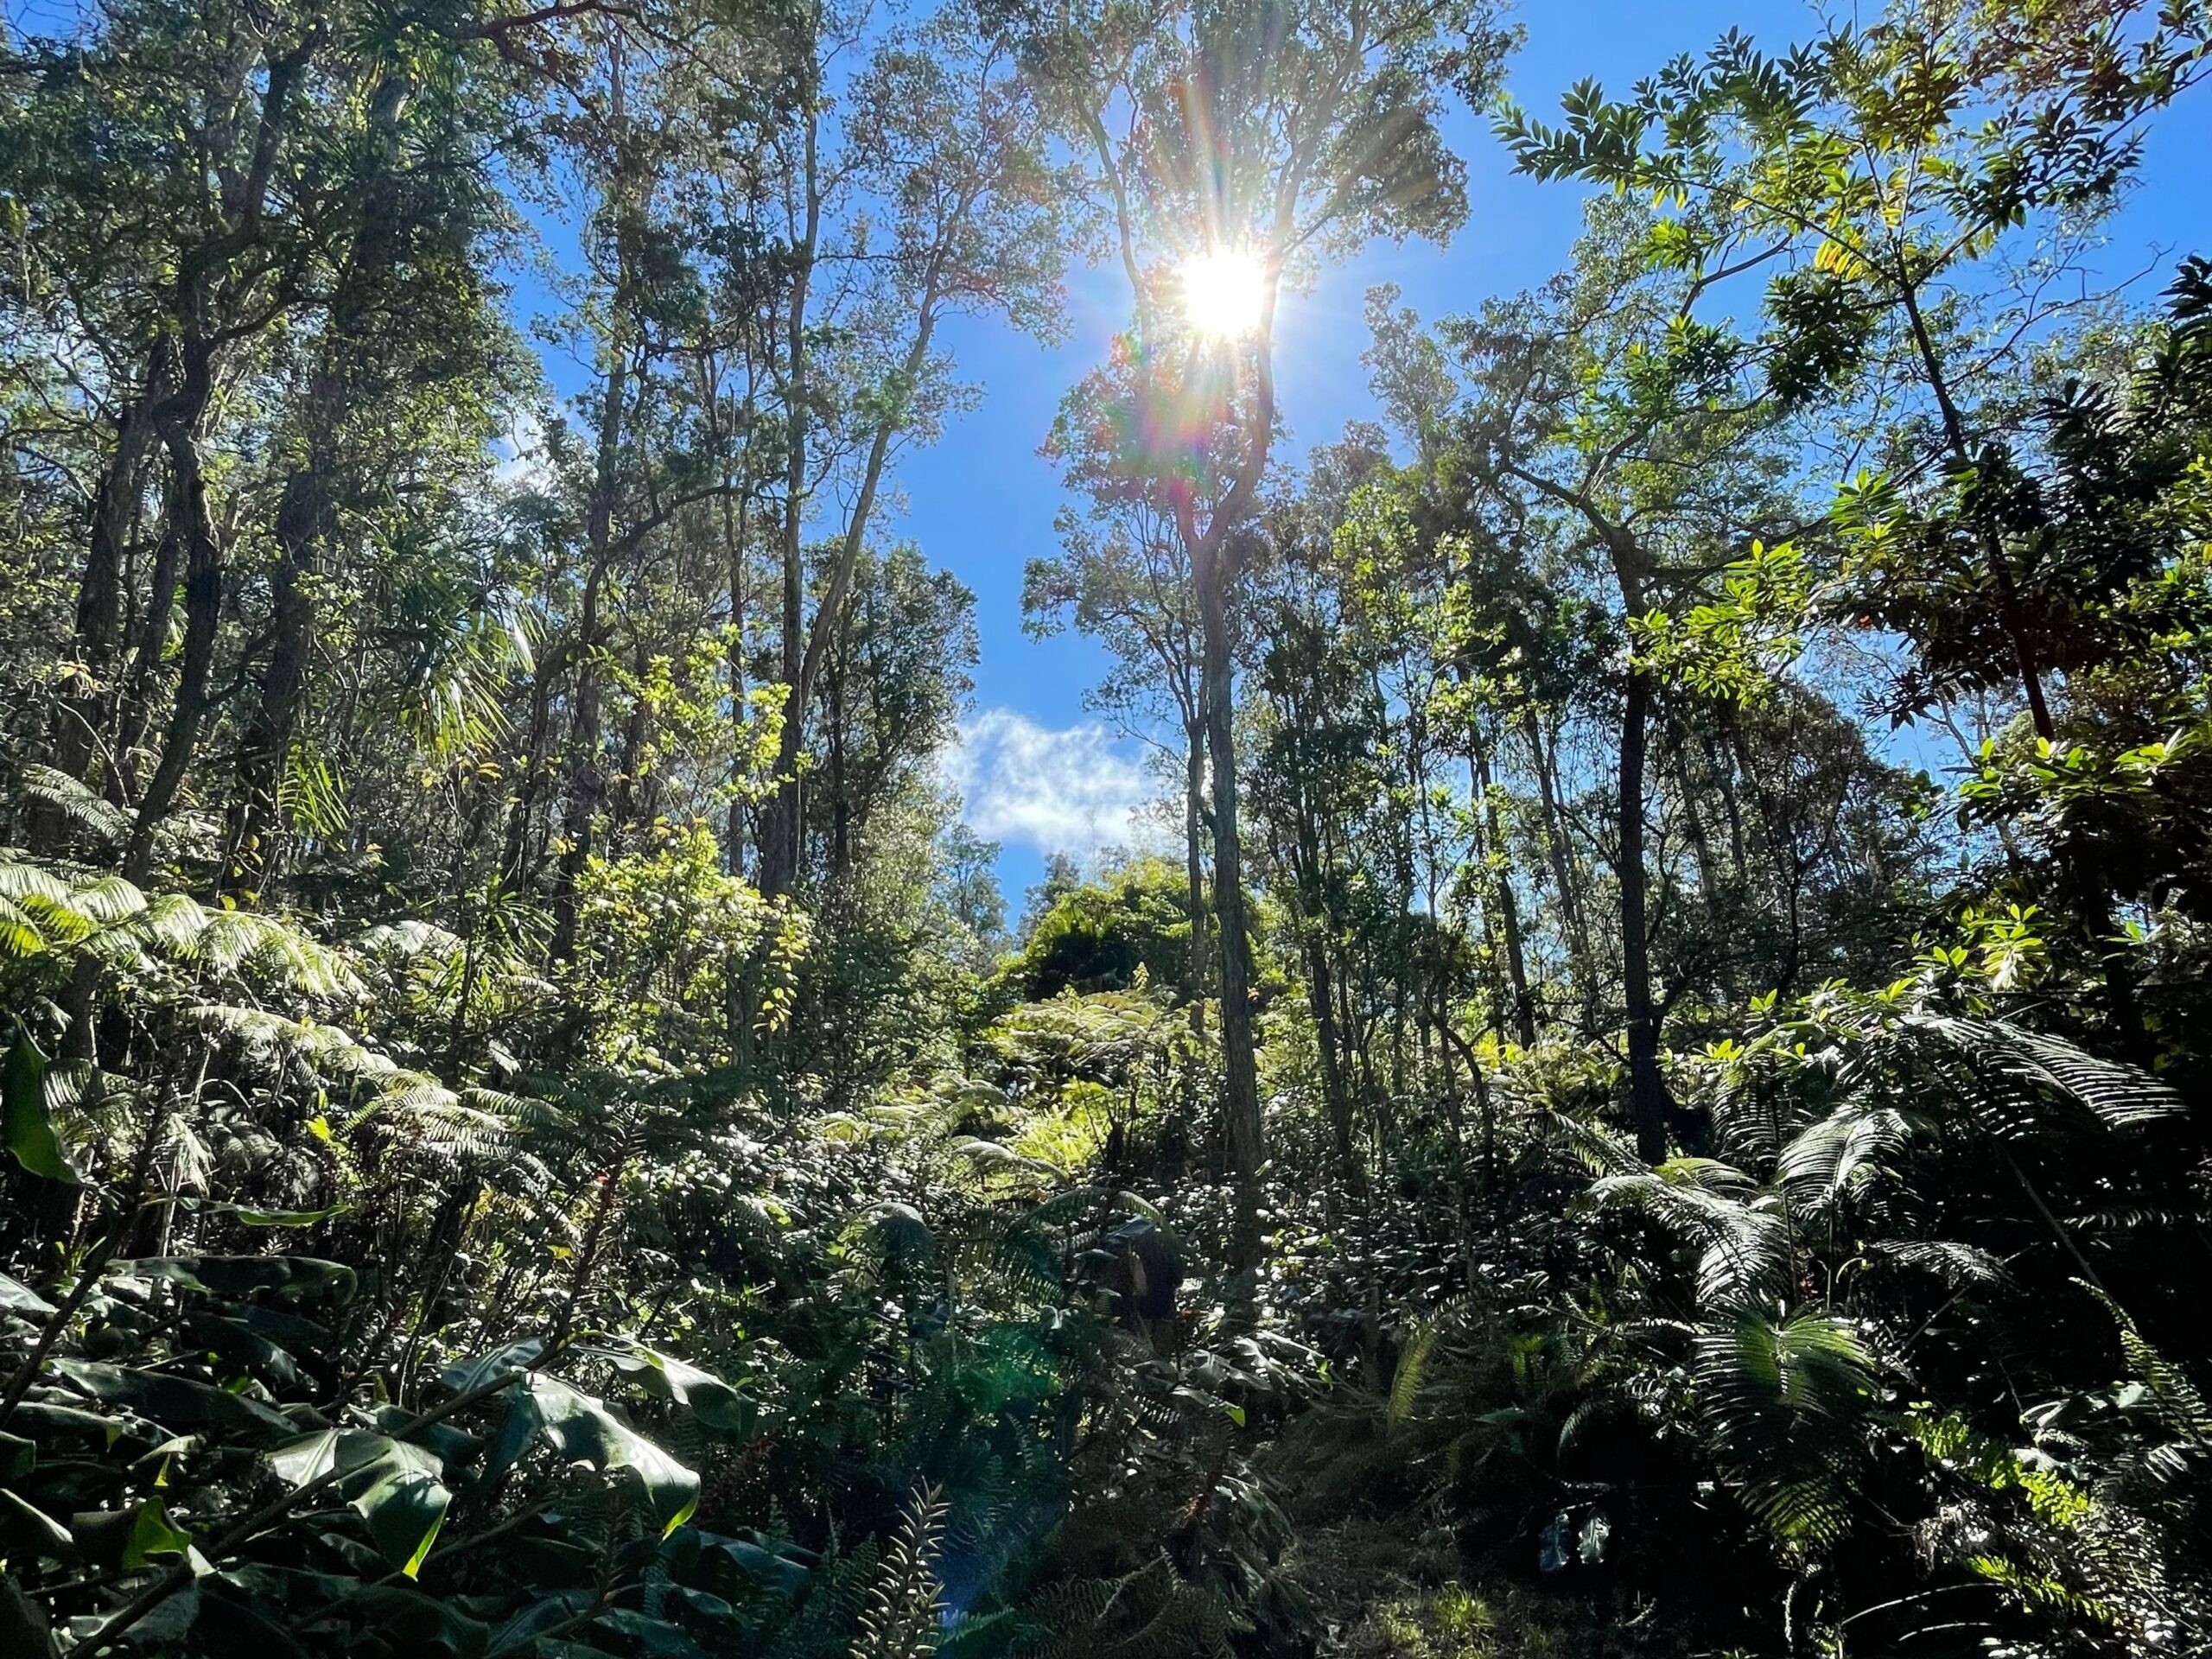 The sun passing through the canopy at the Kona Cloud Forest